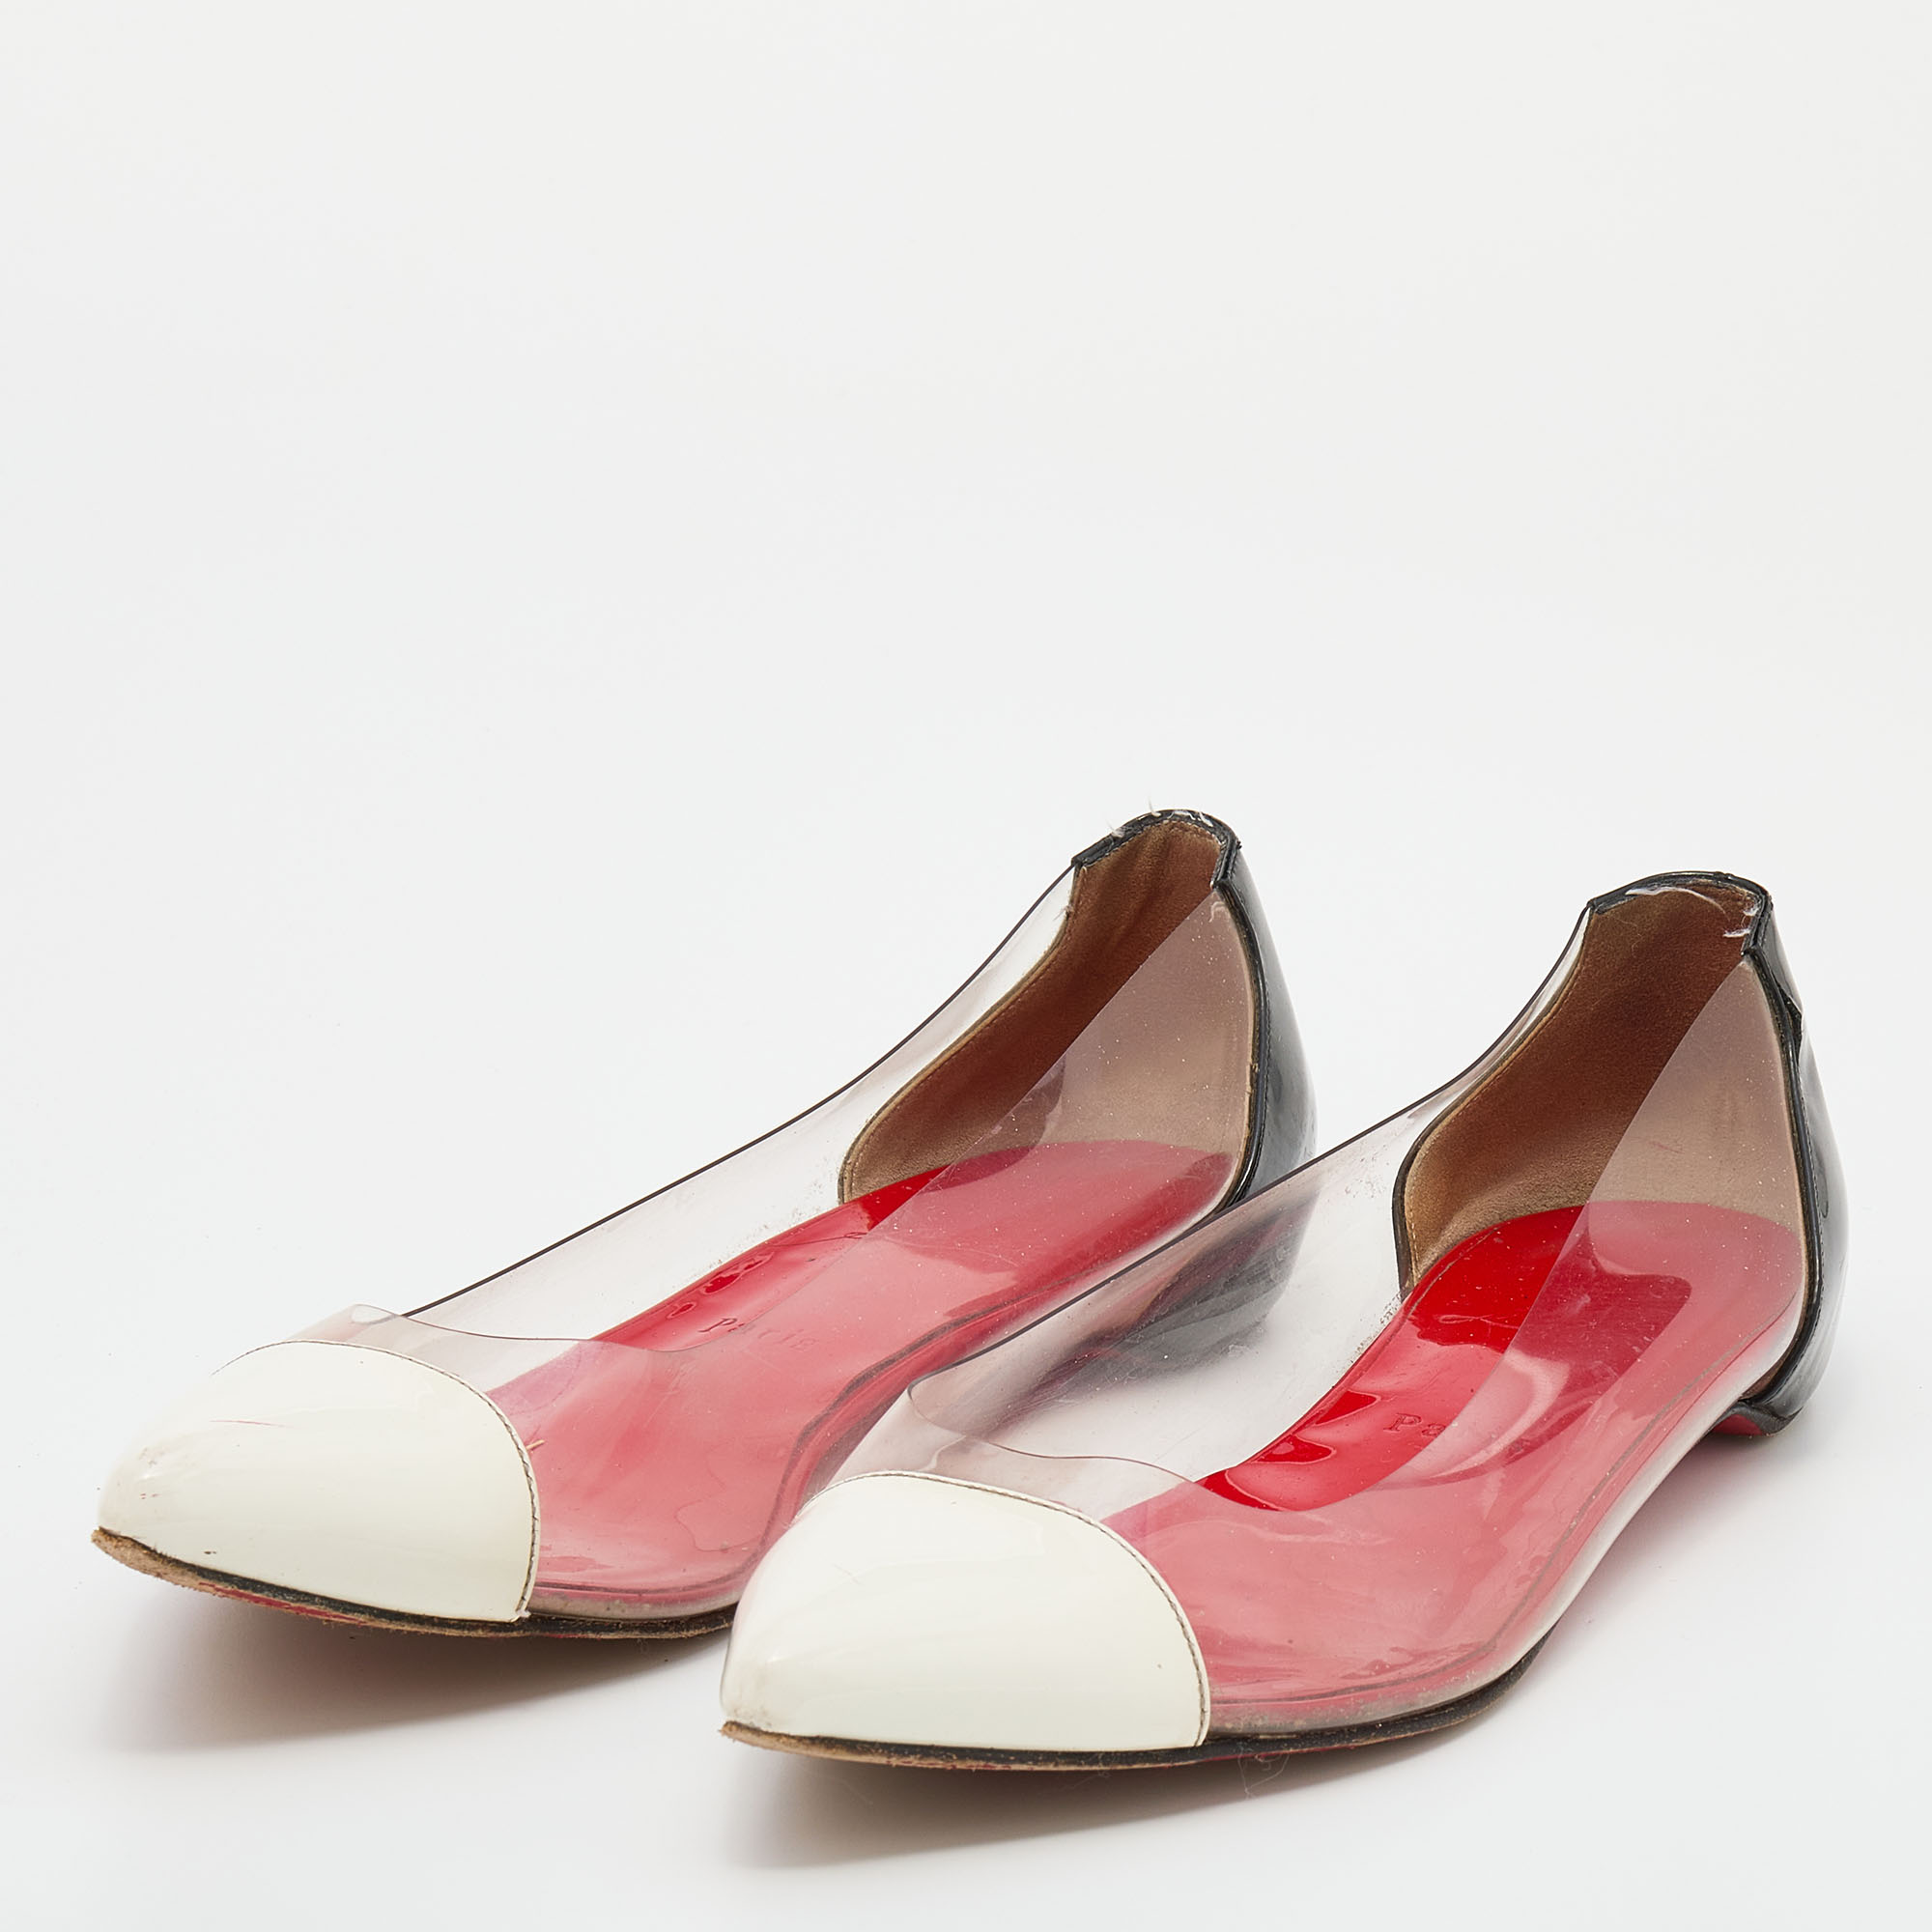 

Christian Louboutin White/Black Patent Leather And PVC Pointed Toe Riviera Ballet Flats Size